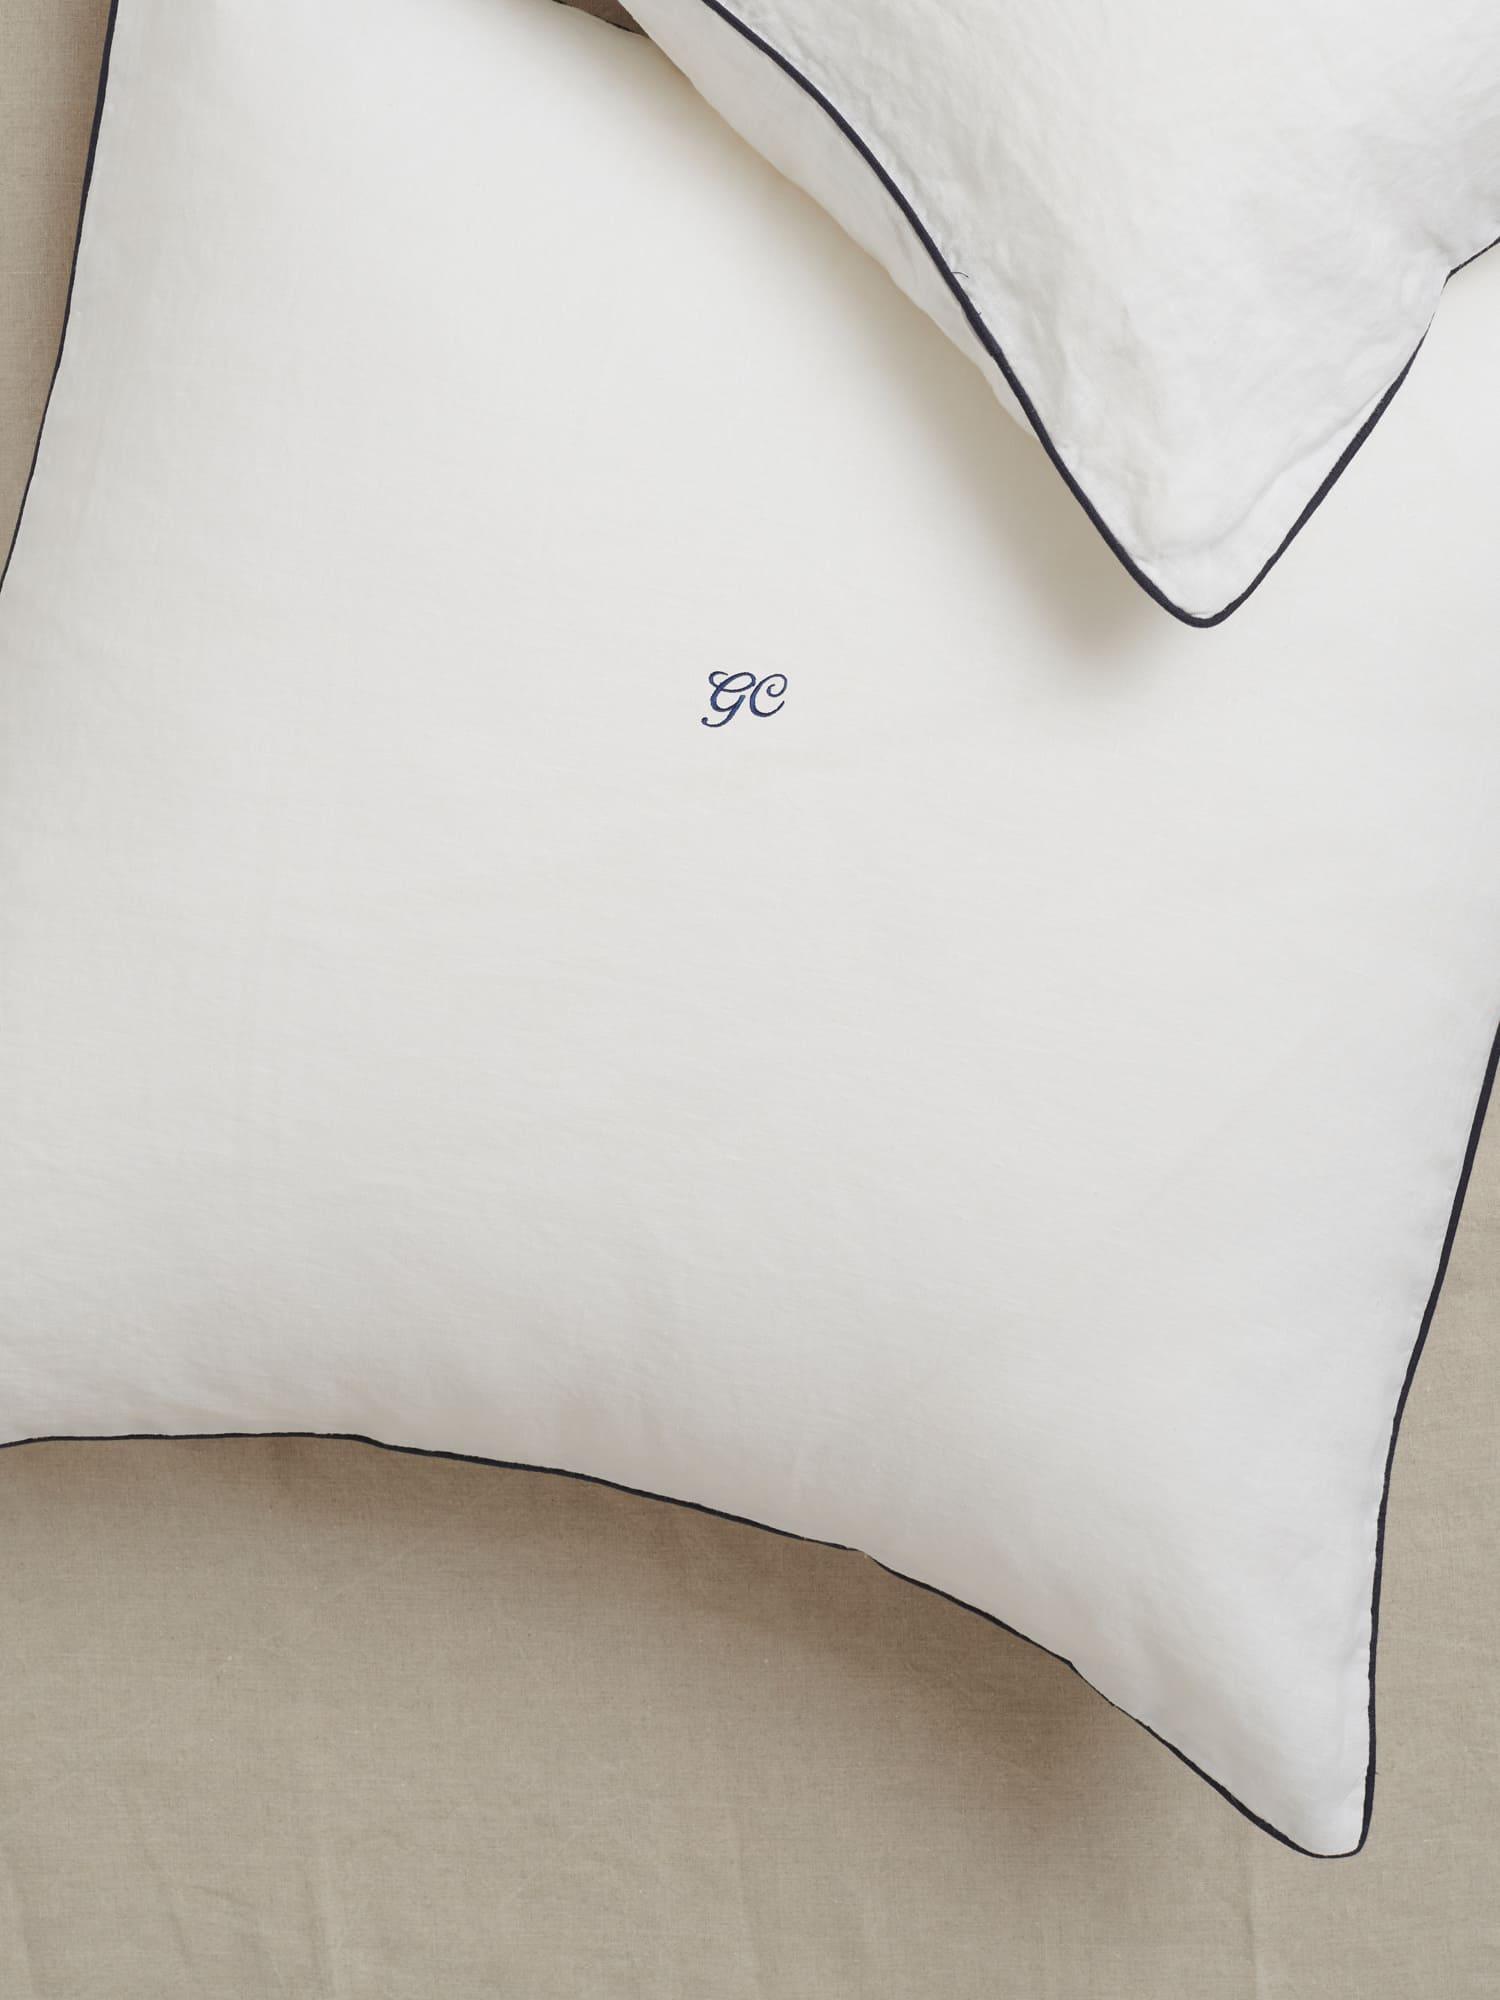 Embroidered Pillowcase Navy Piping